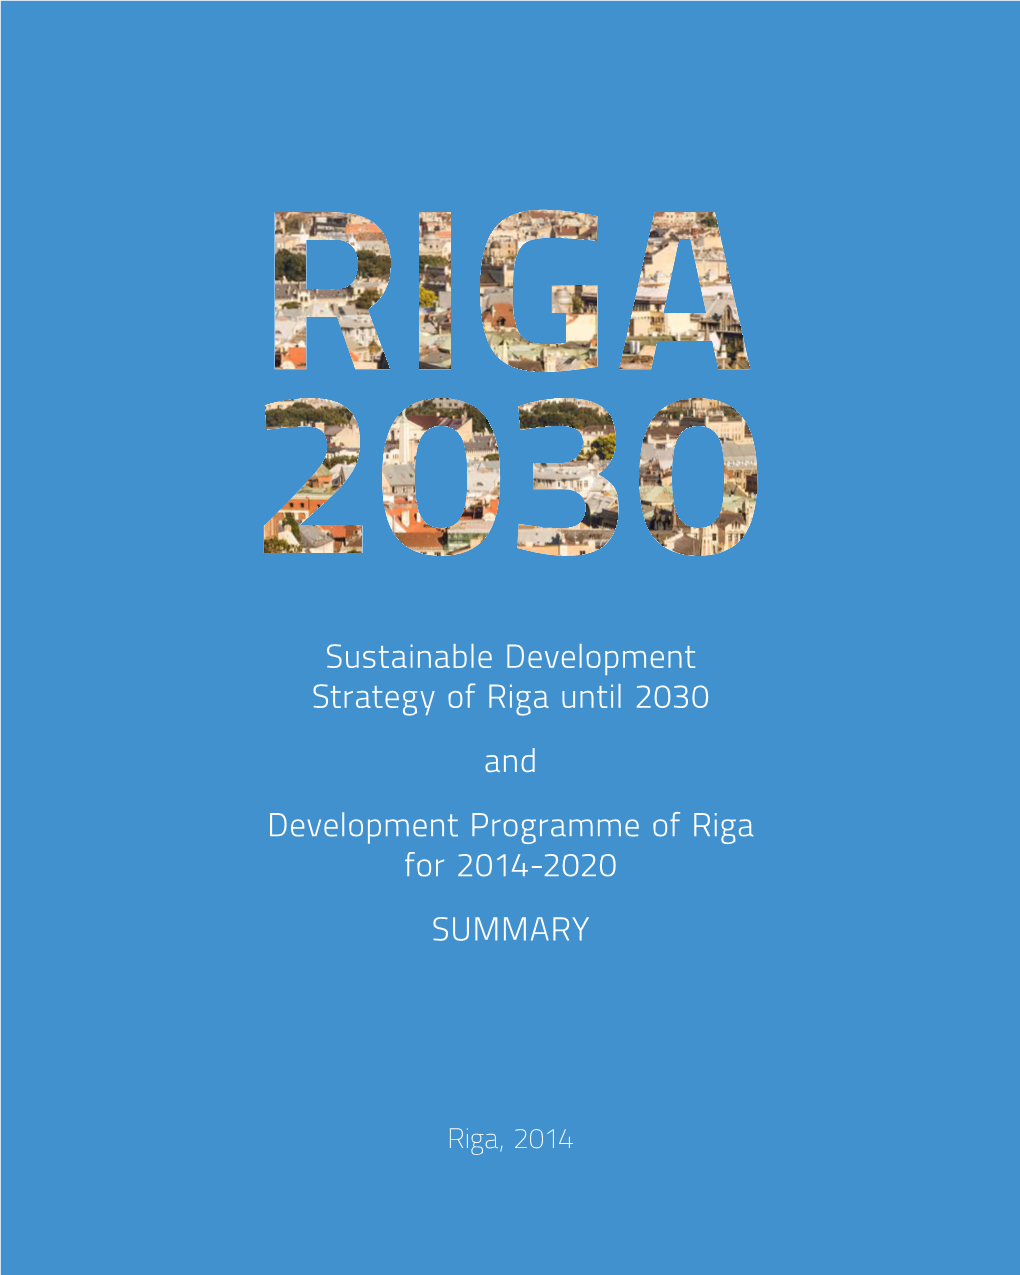 Sustainable Development Strategy of Riga Until 2030 and Development Programme of Riga for 2014-2020 SUMMARY